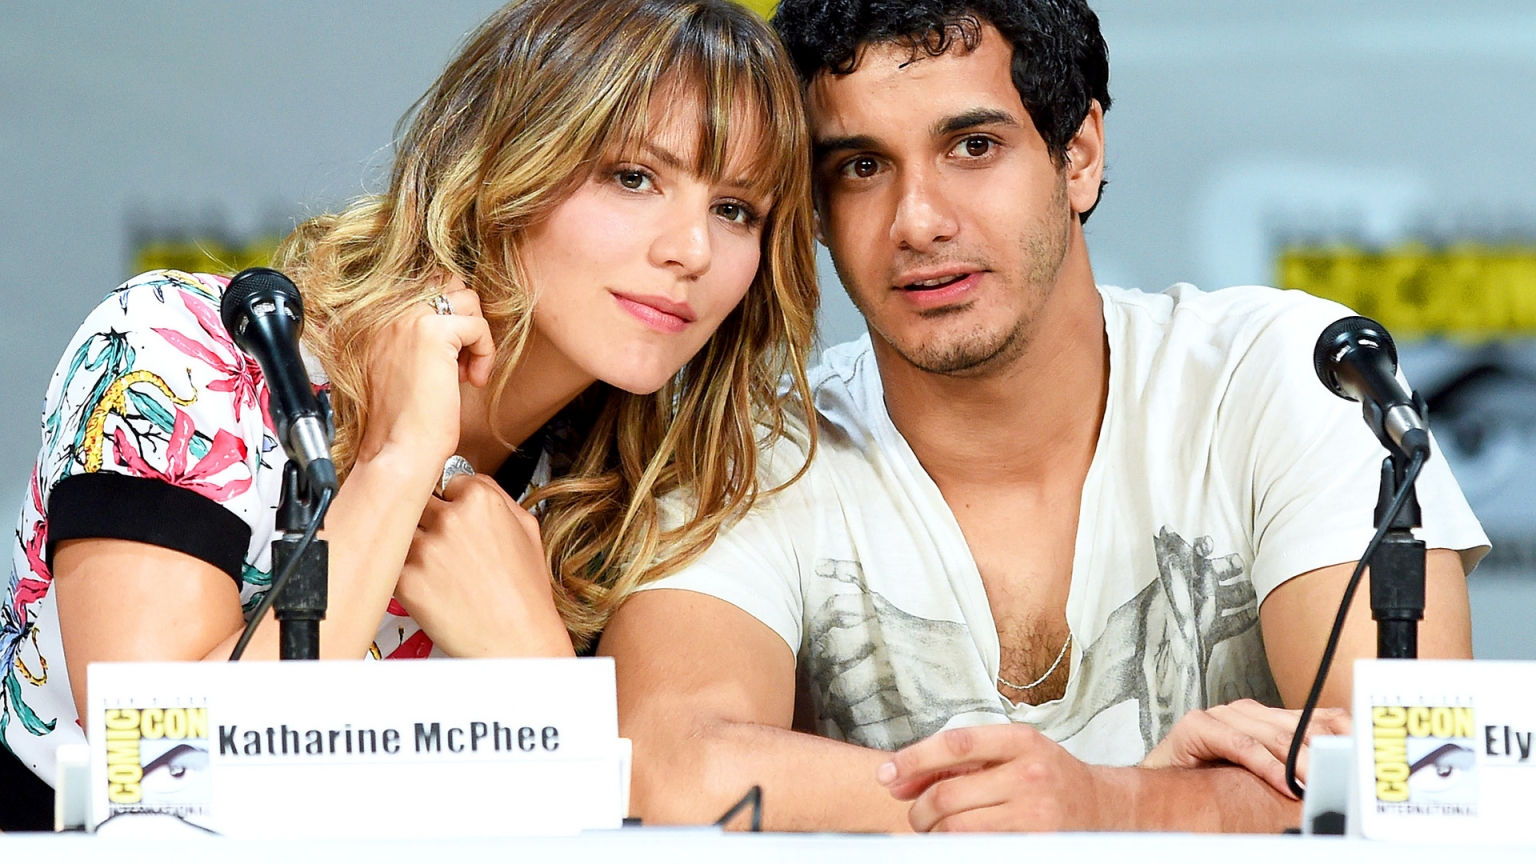 Katharine McPhee and Elyes Gabel for 1536 x 864 HDTV resolution